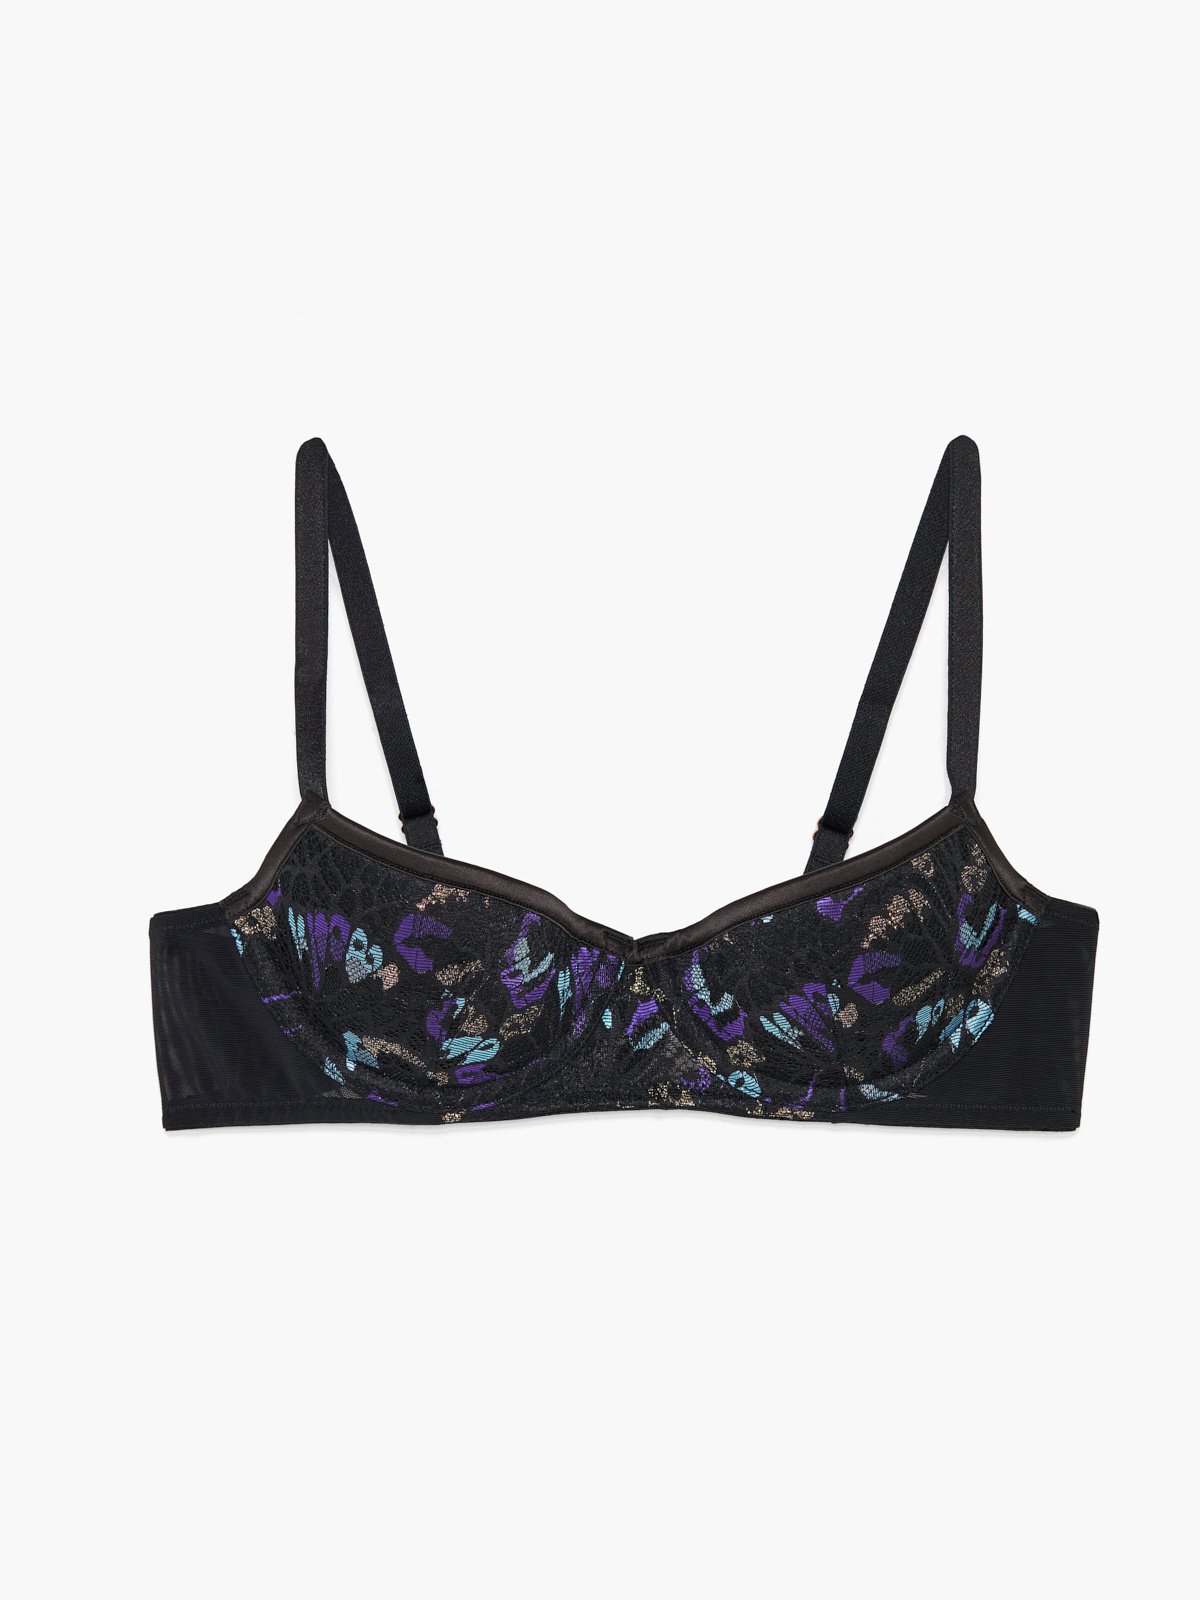 https://cdn.savagex.com/media/images/products/BA2252331-10780/BUTTERFLY-WINGS-LACE-AND-MESH-BALCONETTE-BRA-BA2252331-10780-LAYDOWN-1200x1600.jpg